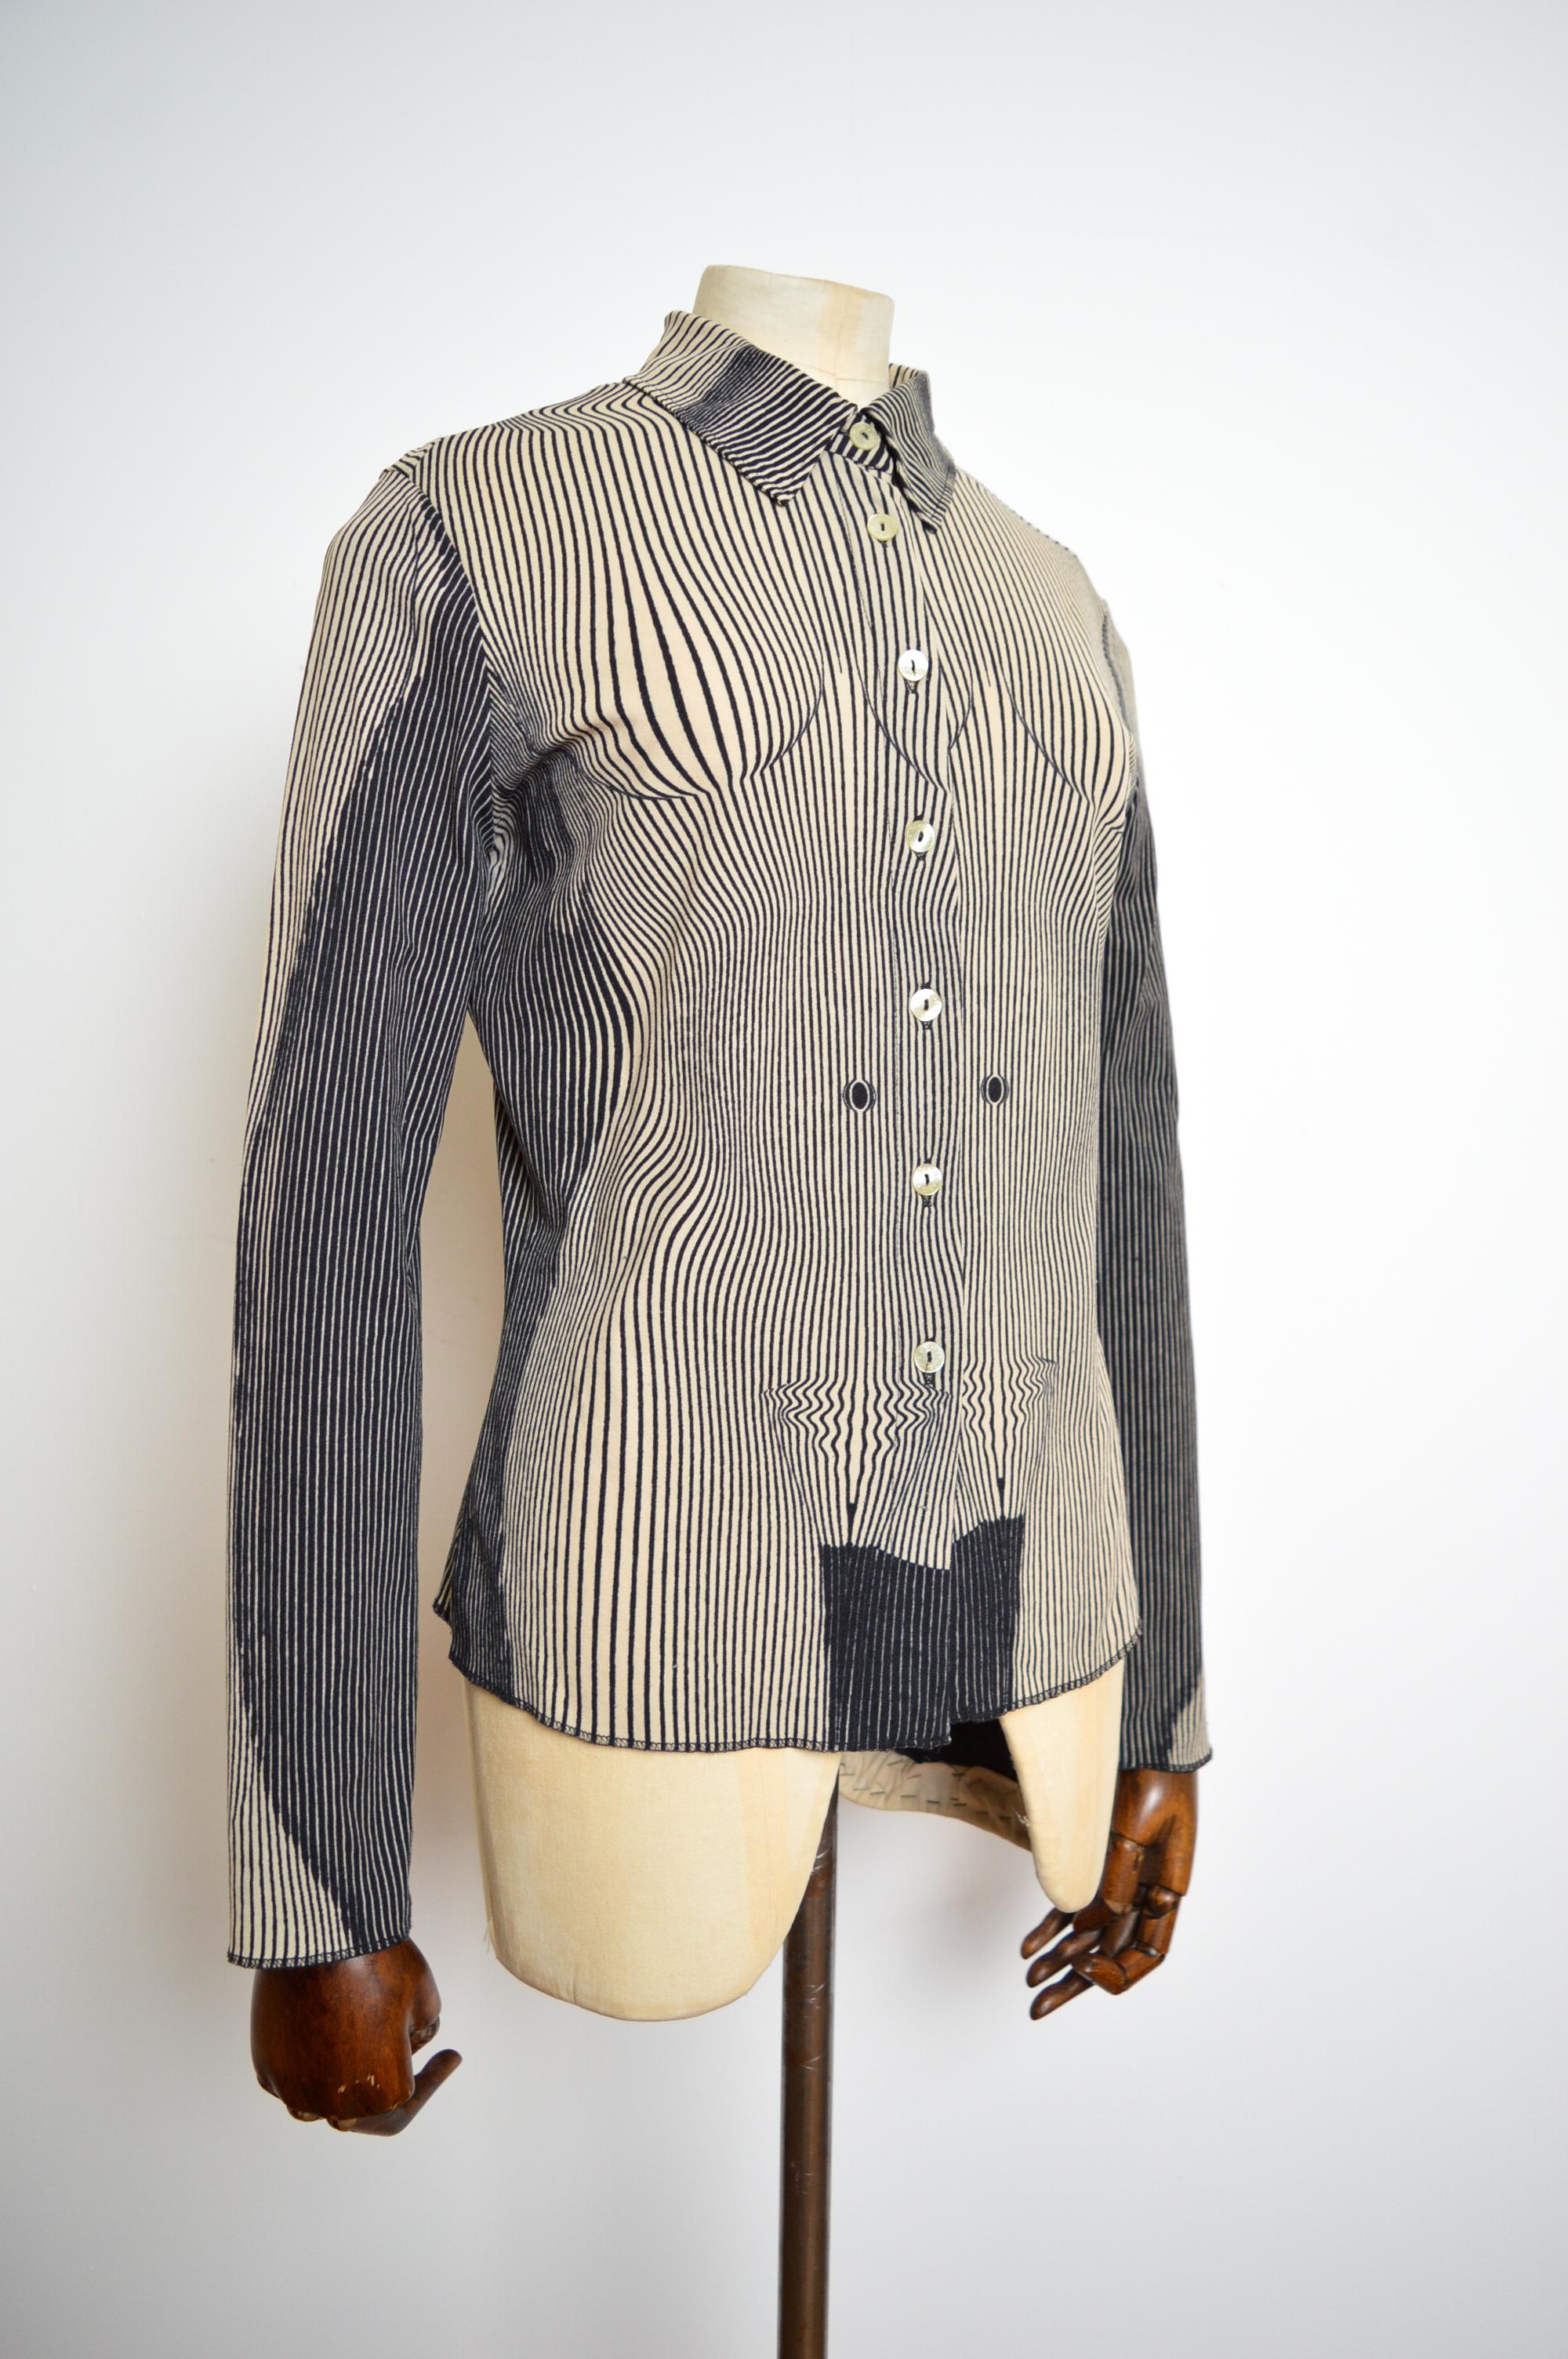 Important 1996 Jean Paul Gaultier Cyber Baba Body Contour Outline Pattern Shirt For Sale 4